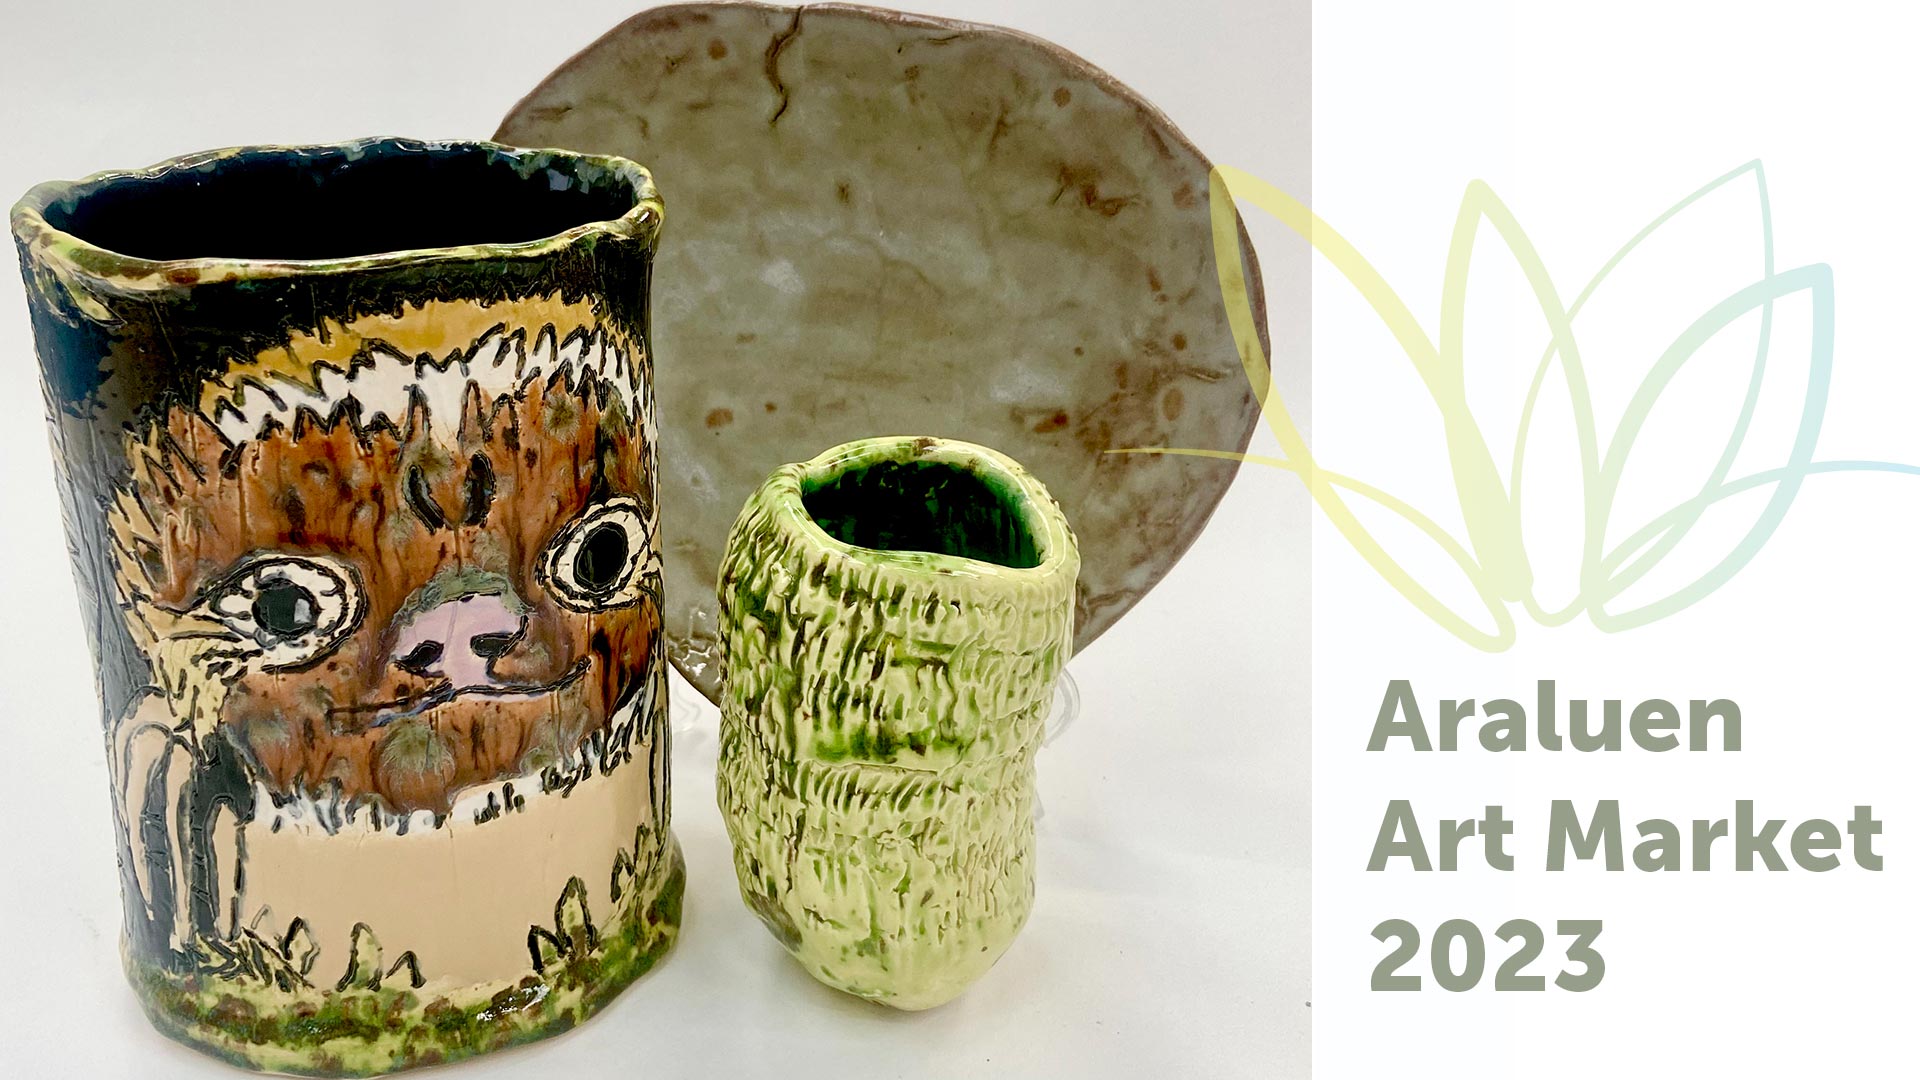 photo of handmade ceramics two vases and a plate and a waterlily logo for Araluen with text that says Araluen Art Market 2023